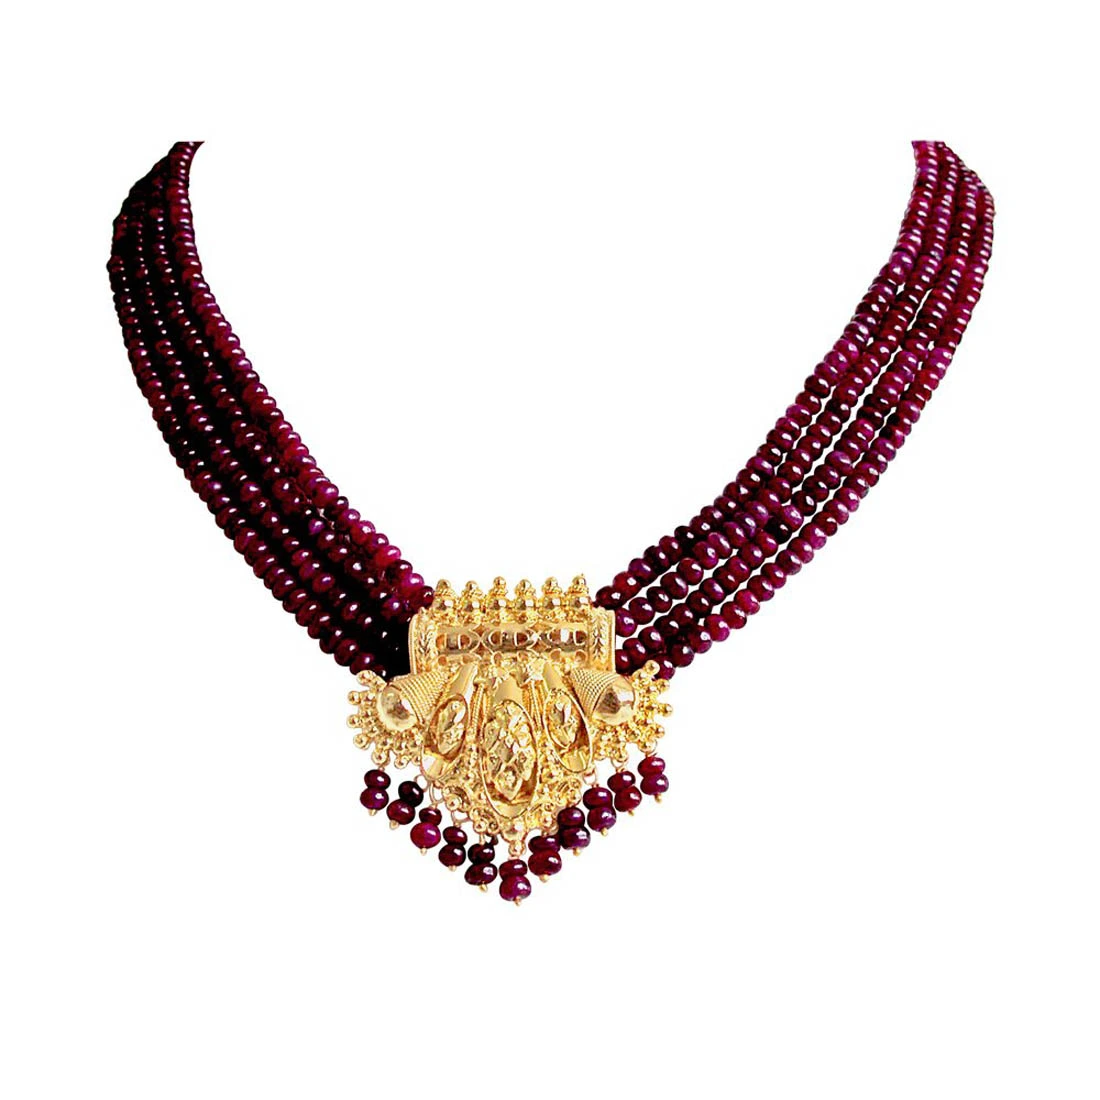 4 Line Real Red Ruby Beads & Gold Plated Pendant Necklace for Women (RBN4)